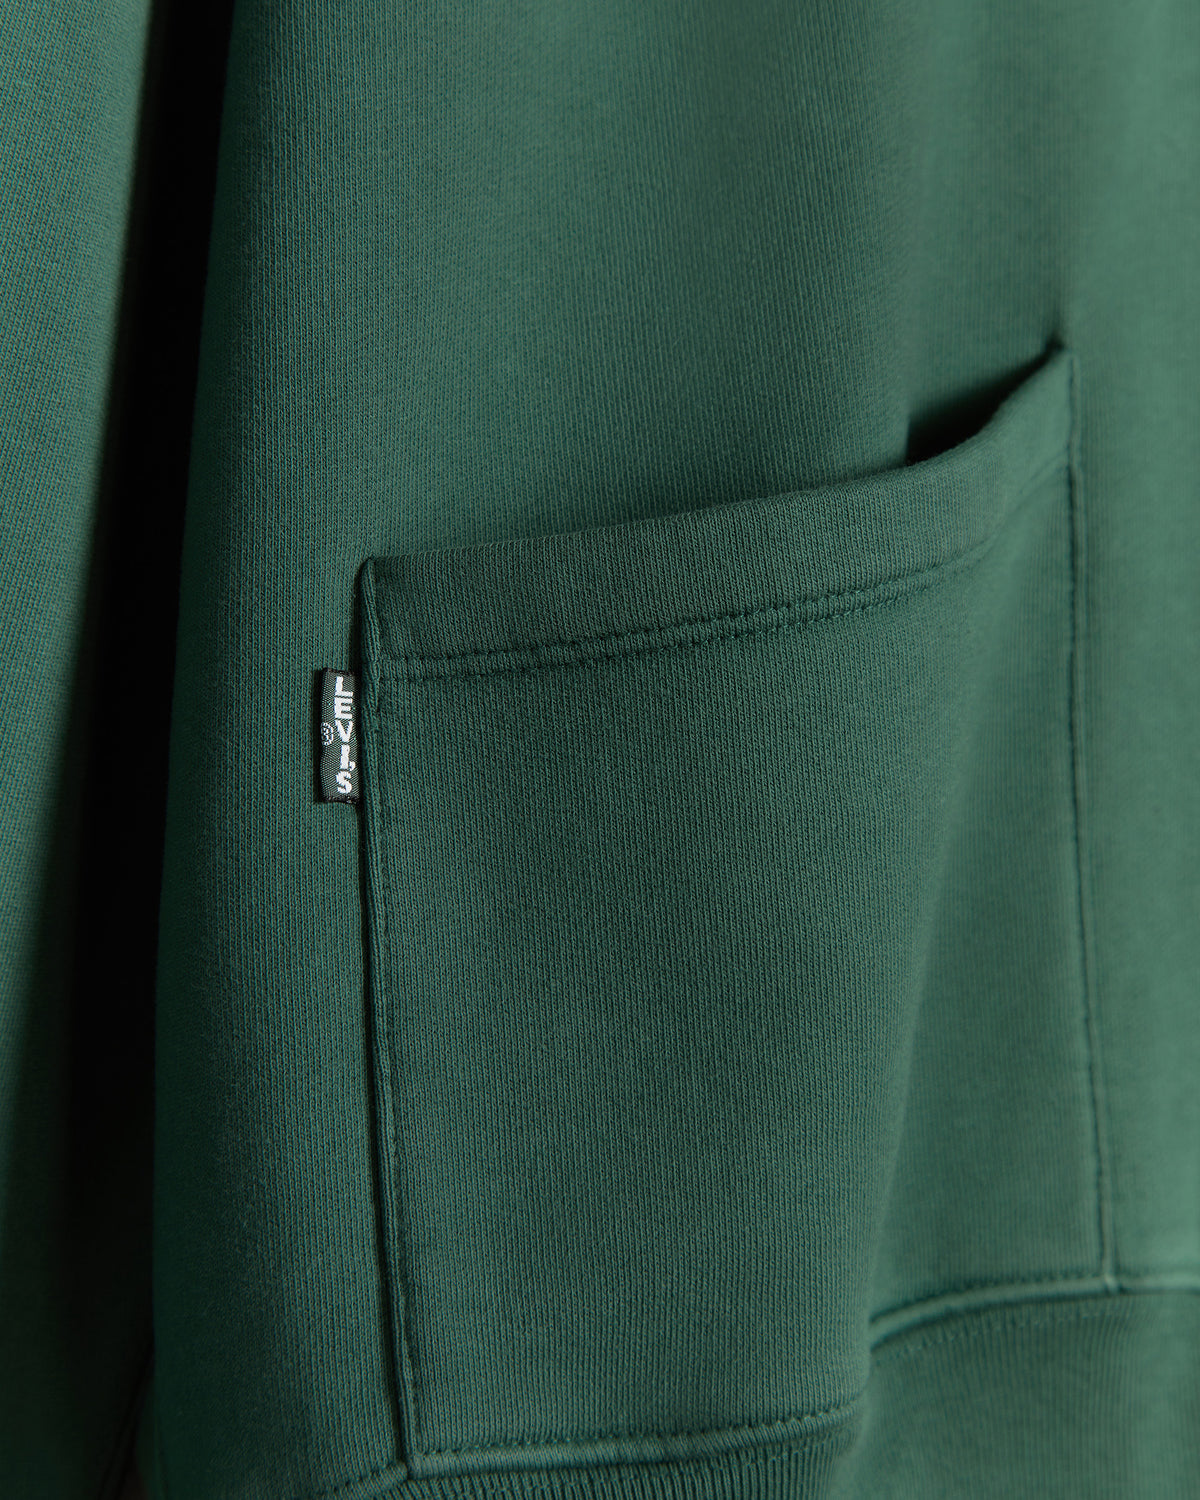 RCI x Levi's Two Pocket Hooded Sweatshirt in Forest Green